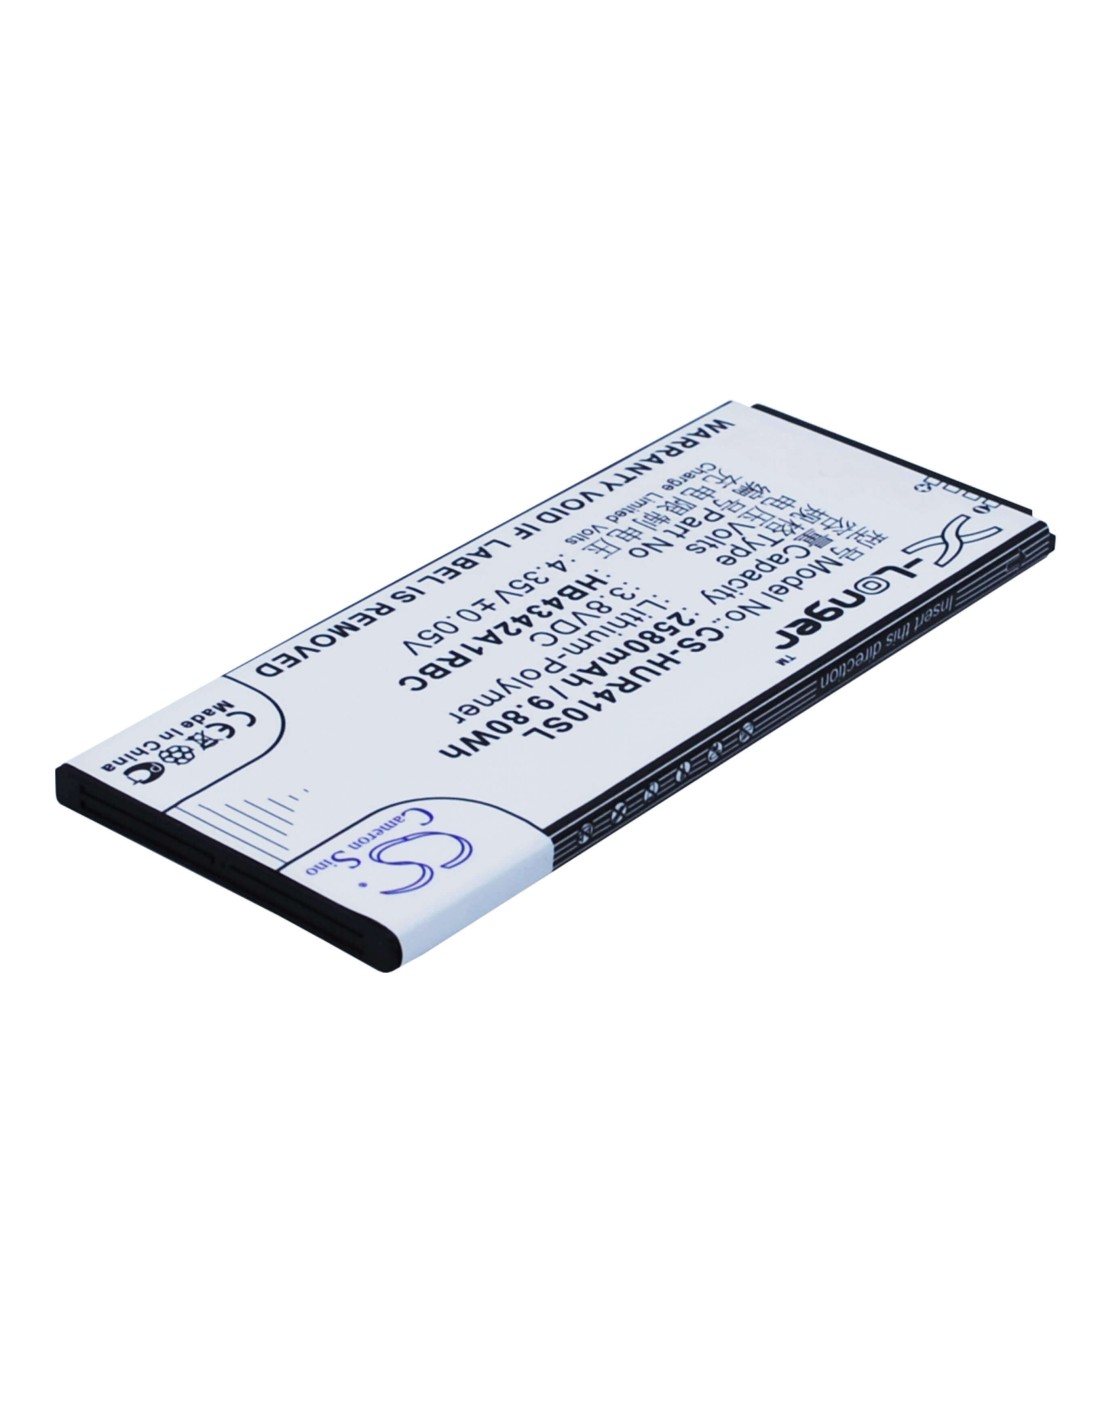 Battery for Huawei Honor 4A, Honor 4A Dual SIM, SCL-L00 3.8V, 2580mAh - 9.80Wh